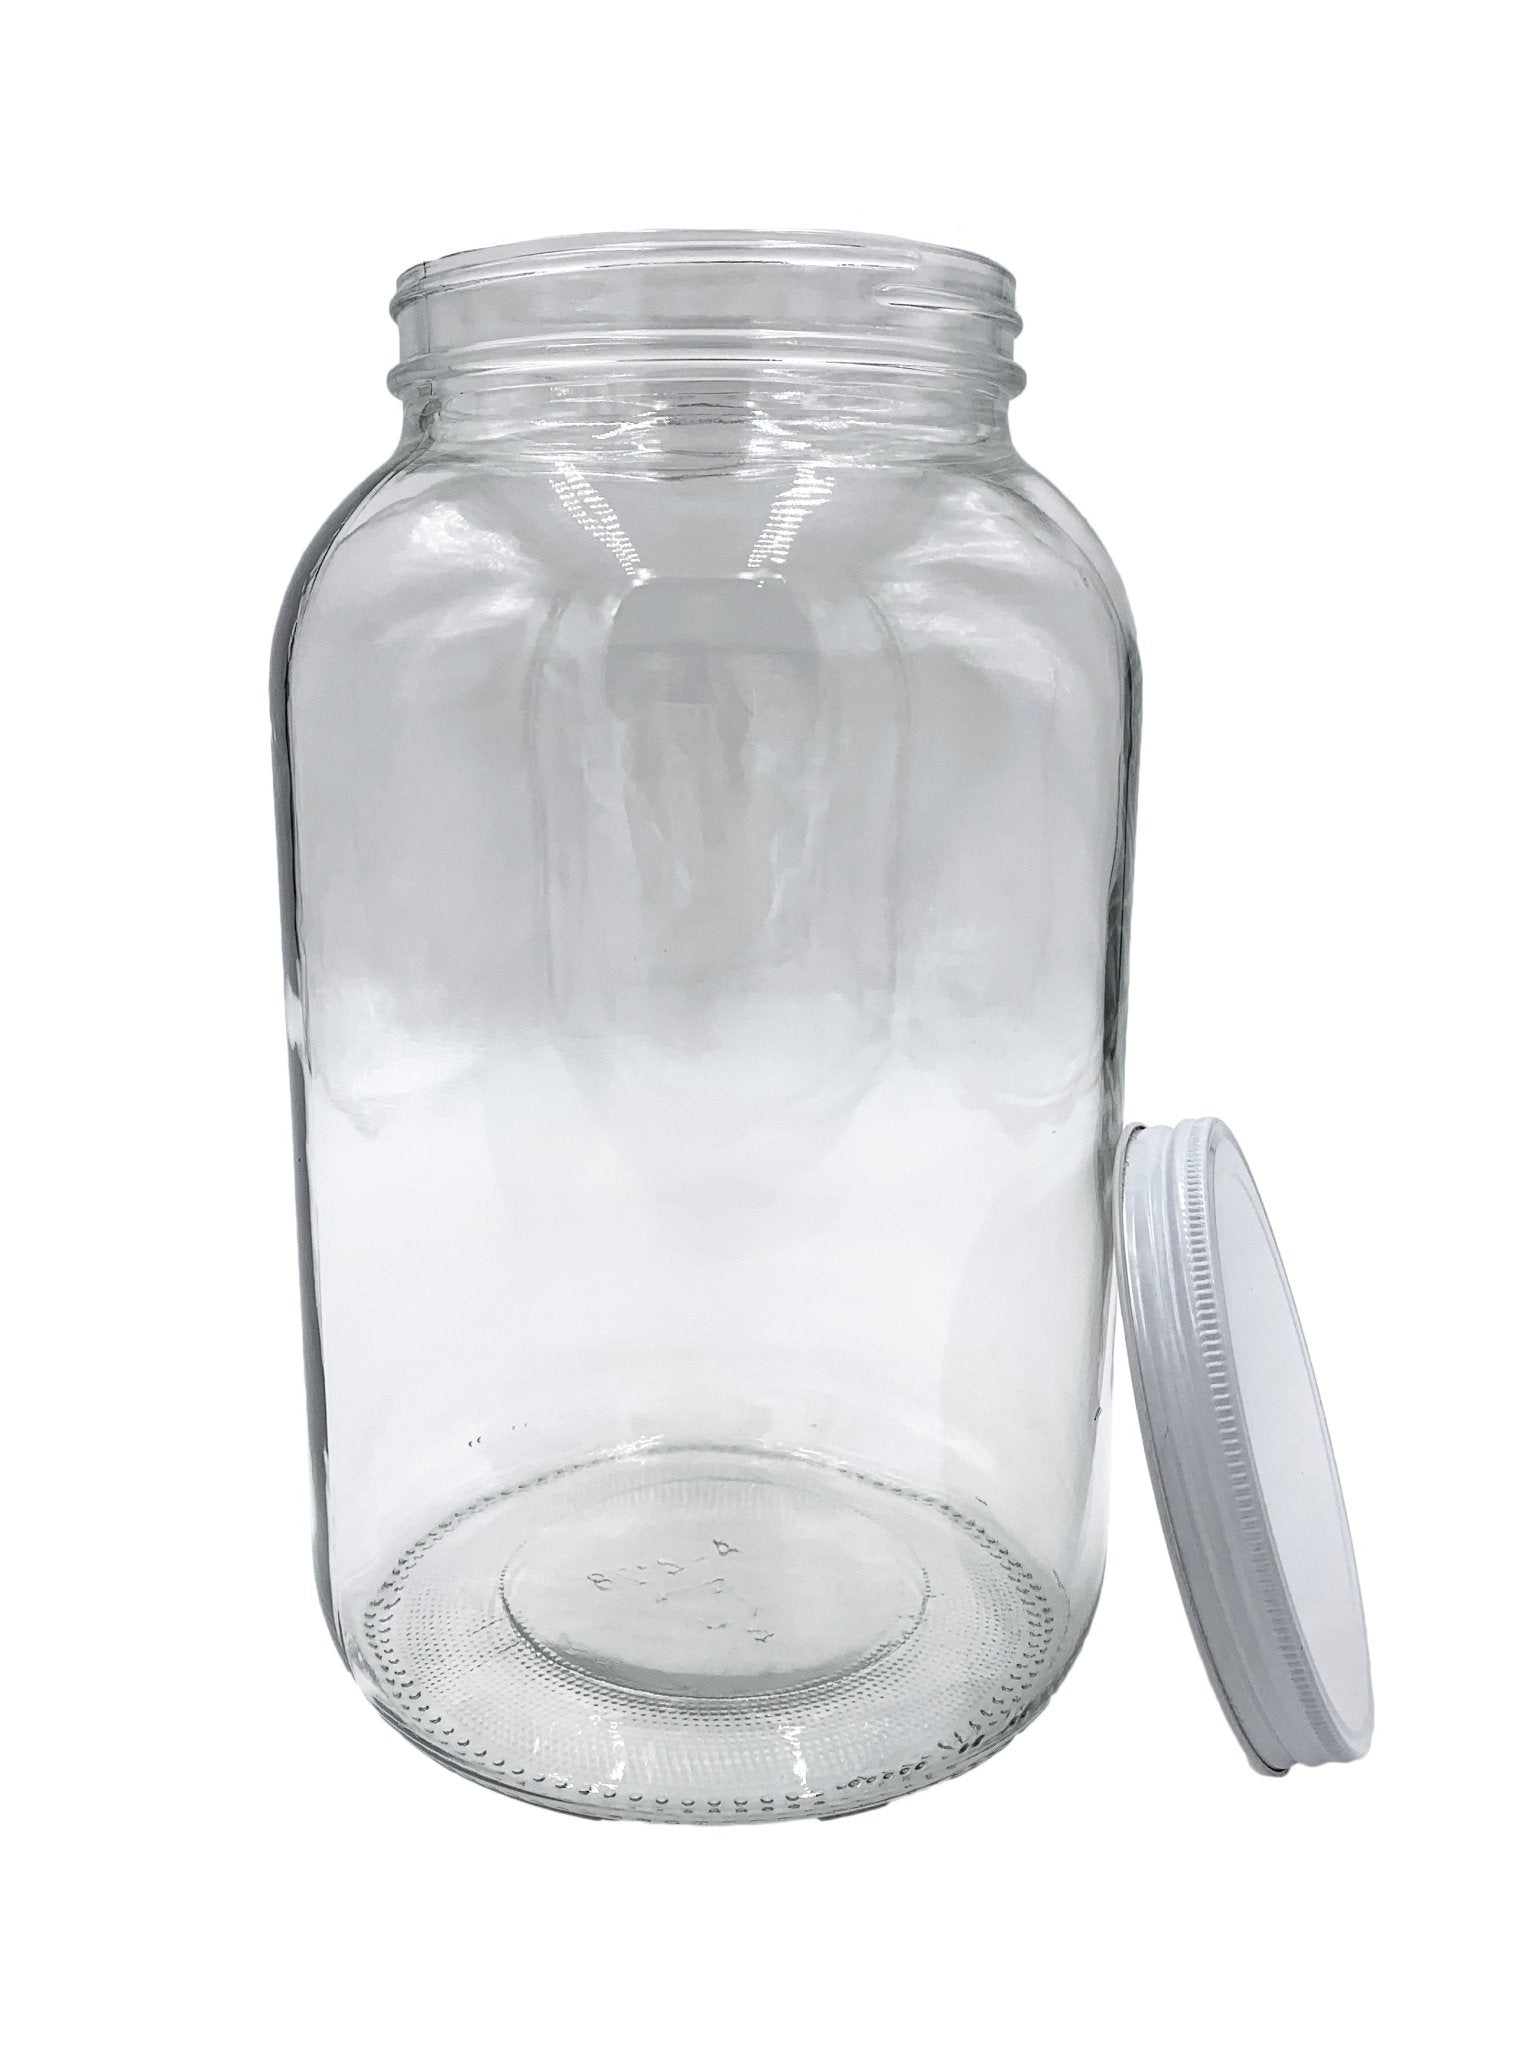 Wide-Mouth Glass Jars - 1 Gallon, 4 Opening, Metal Cap